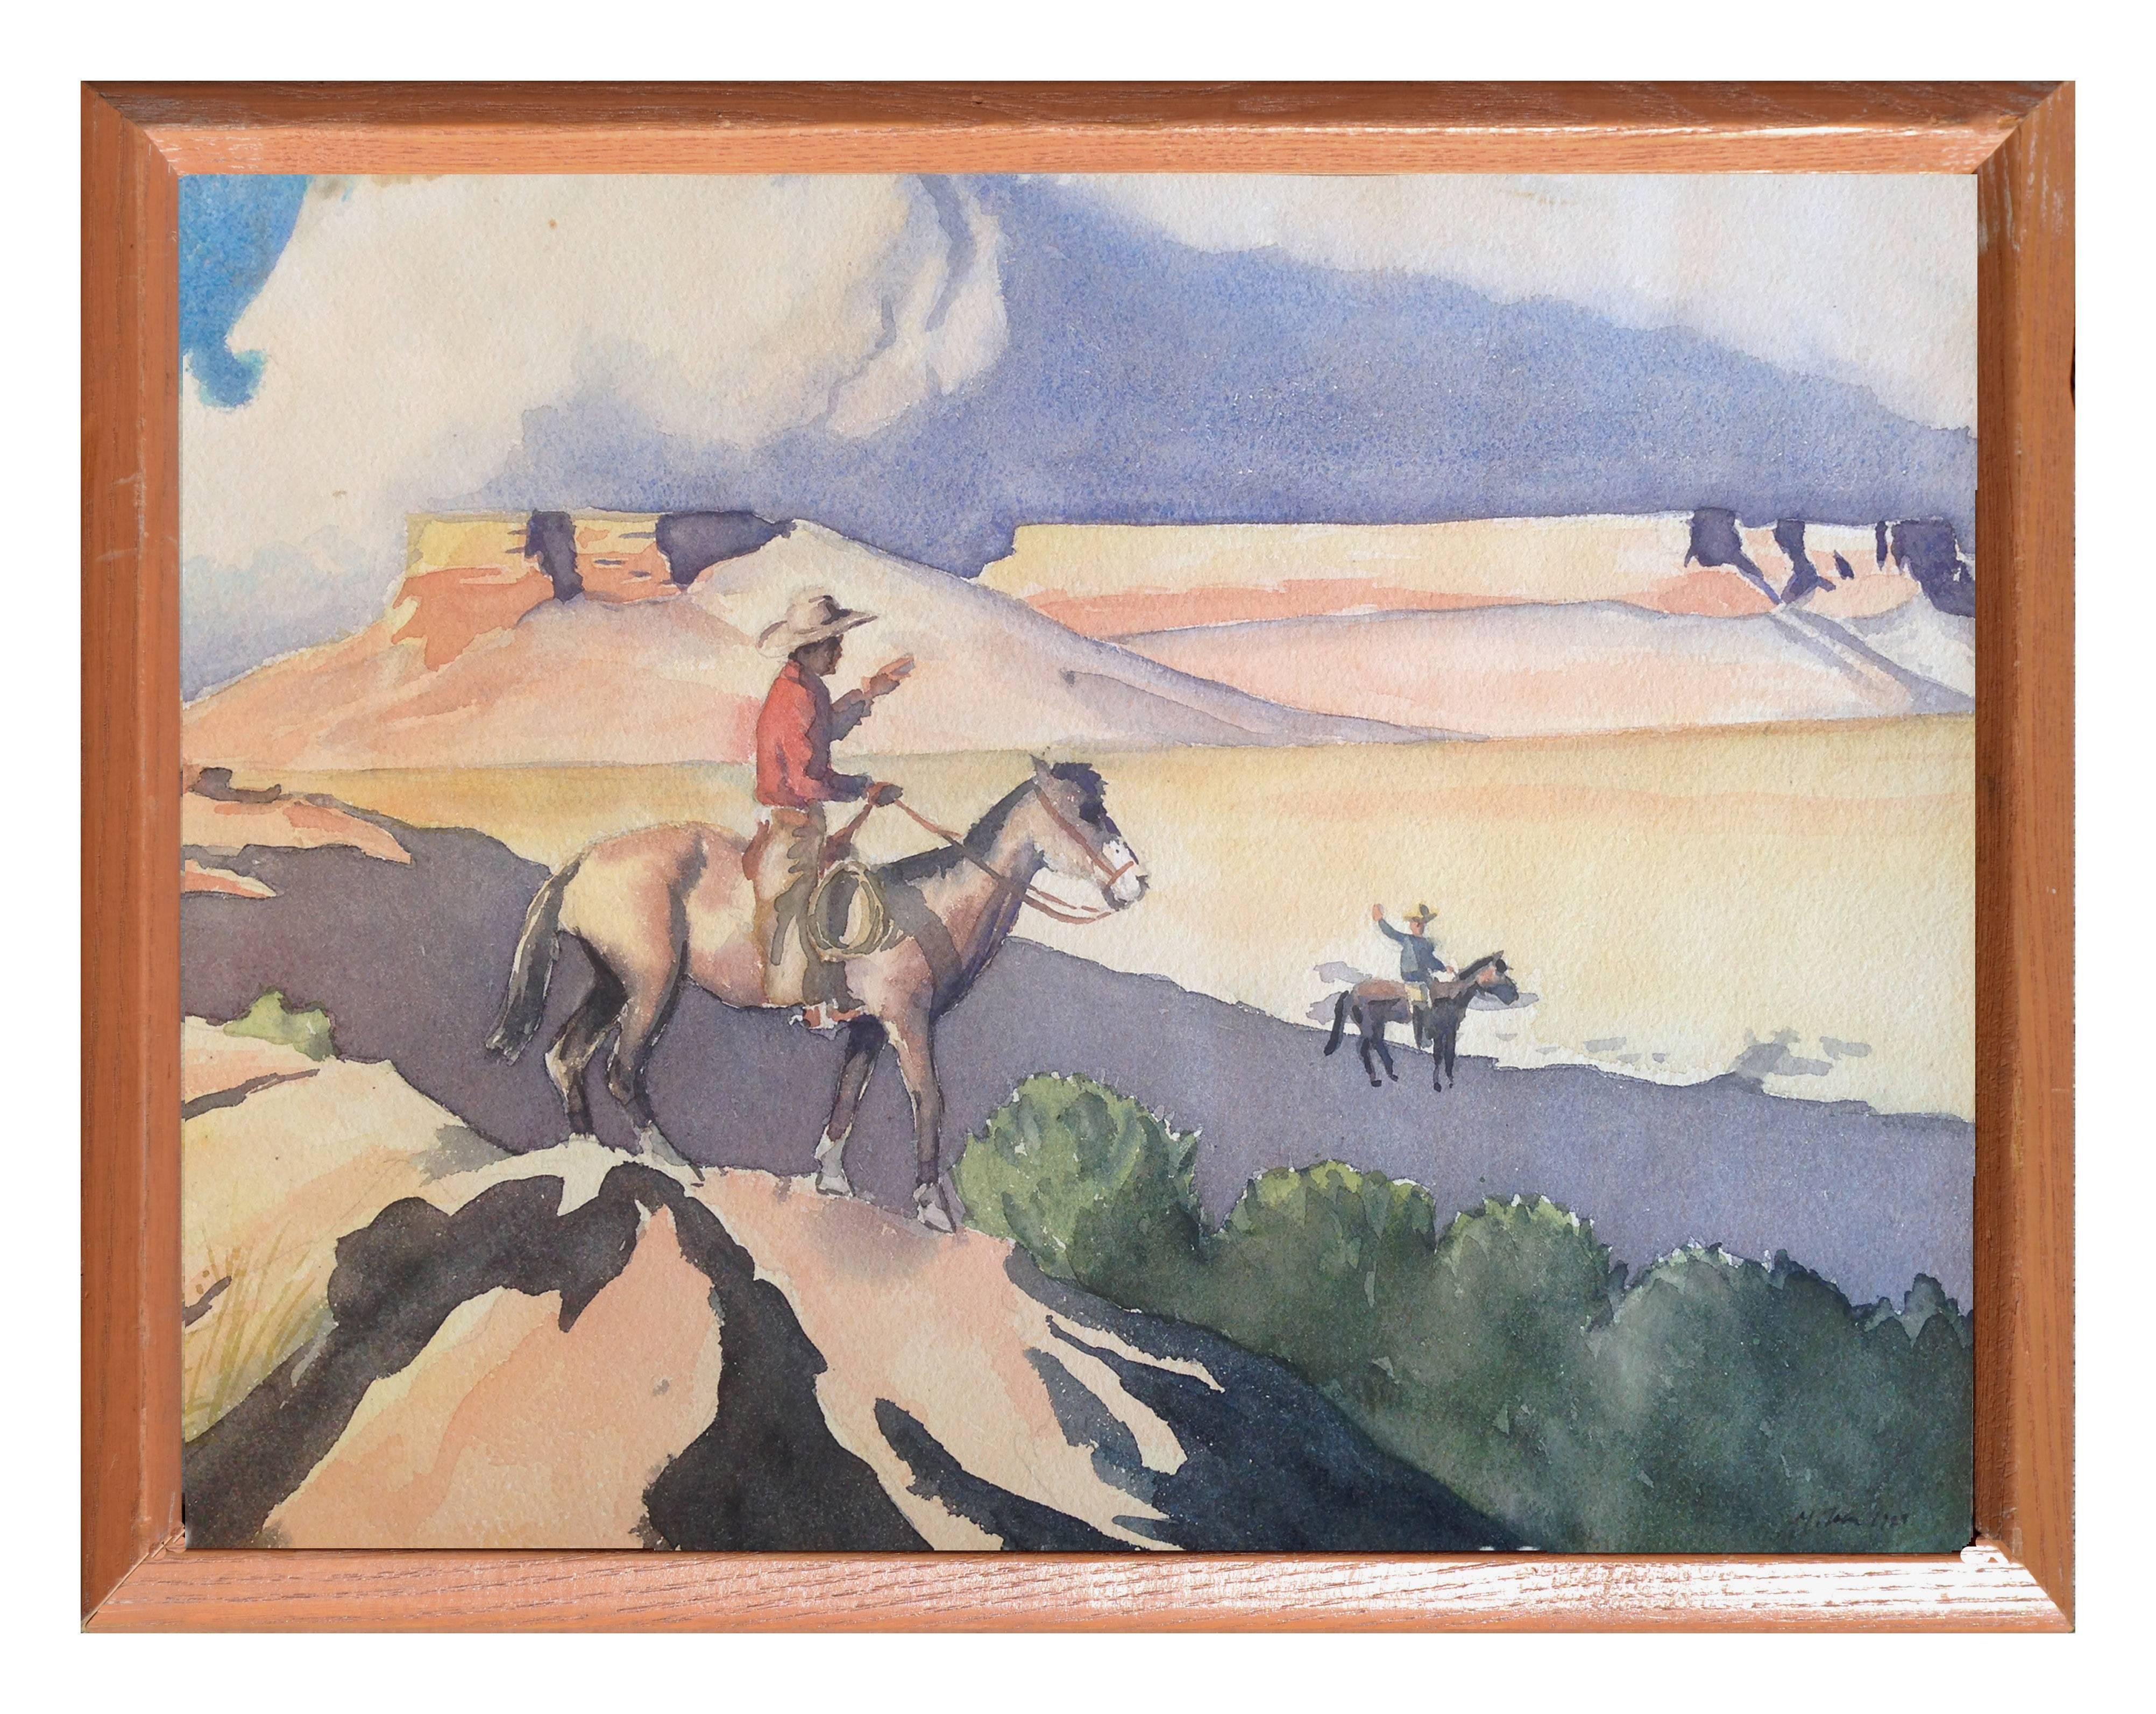 Beautiful watercolor painting of a cowboy riding his horse through the New Mexico mountains while another waves from nearby. Signed "M. Taber 1929" lower right. Presented in a wood frame, not matted. Image, 10.5"H x 13.5"L.